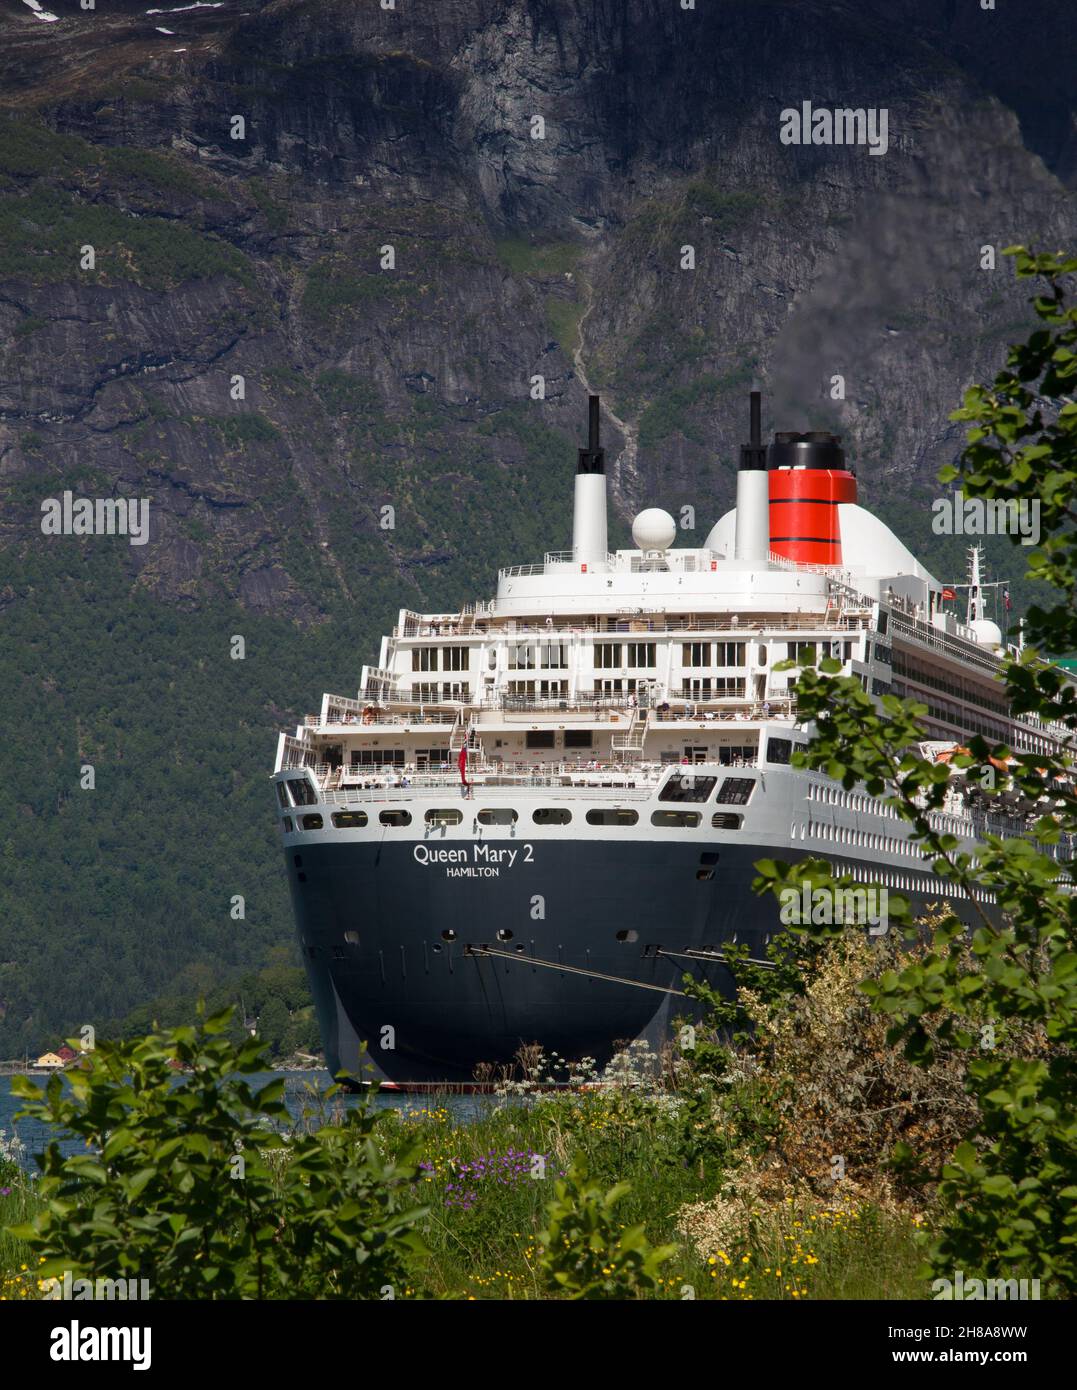 The Cunard Liner Queen Mary 2 moored at Olden in the Nordfjorden, Norway.  Sogn og Fjordane county. Stock Photo